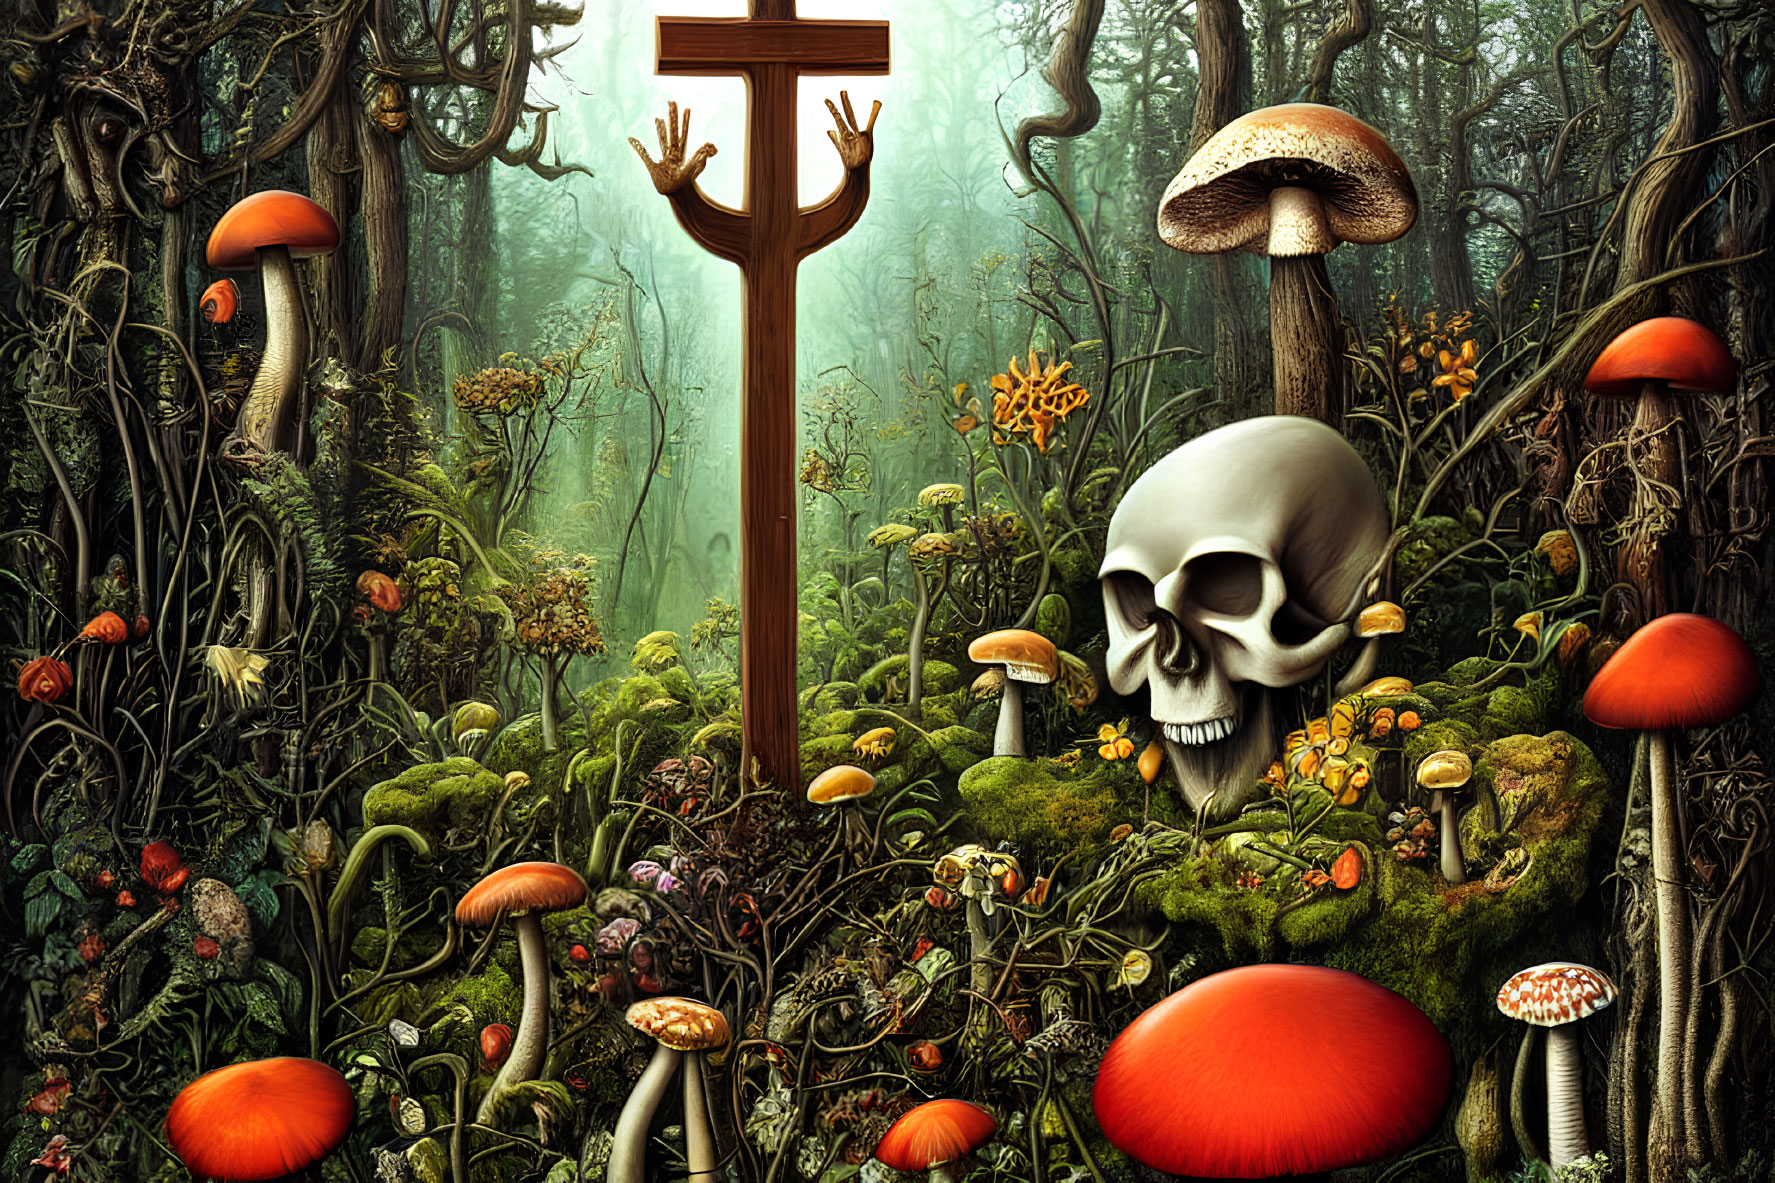 Surreal forest scene with colorful mushrooms and large skull